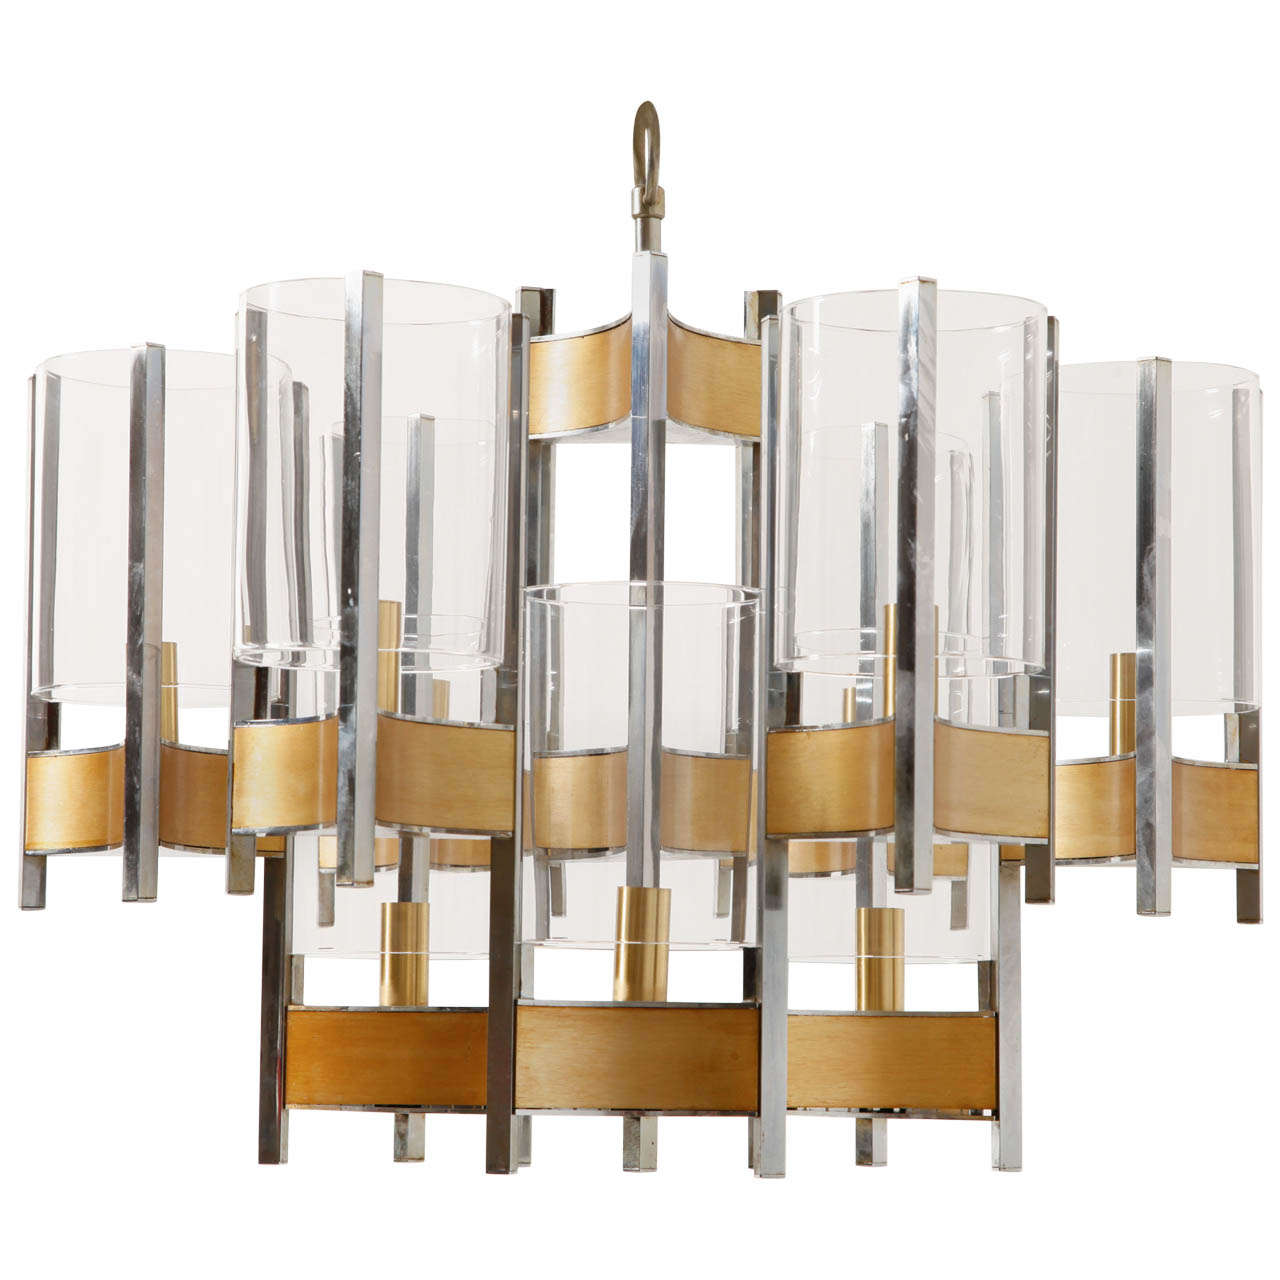 Two tired silver with brushed brass insets and nine light clear glass cylinder shades designed by Gaetano Sciolari, 1970s in Italy. Original piece and beautiful quality. Signed Sciolari.
It can be used with regular E14 candle light bulbs.